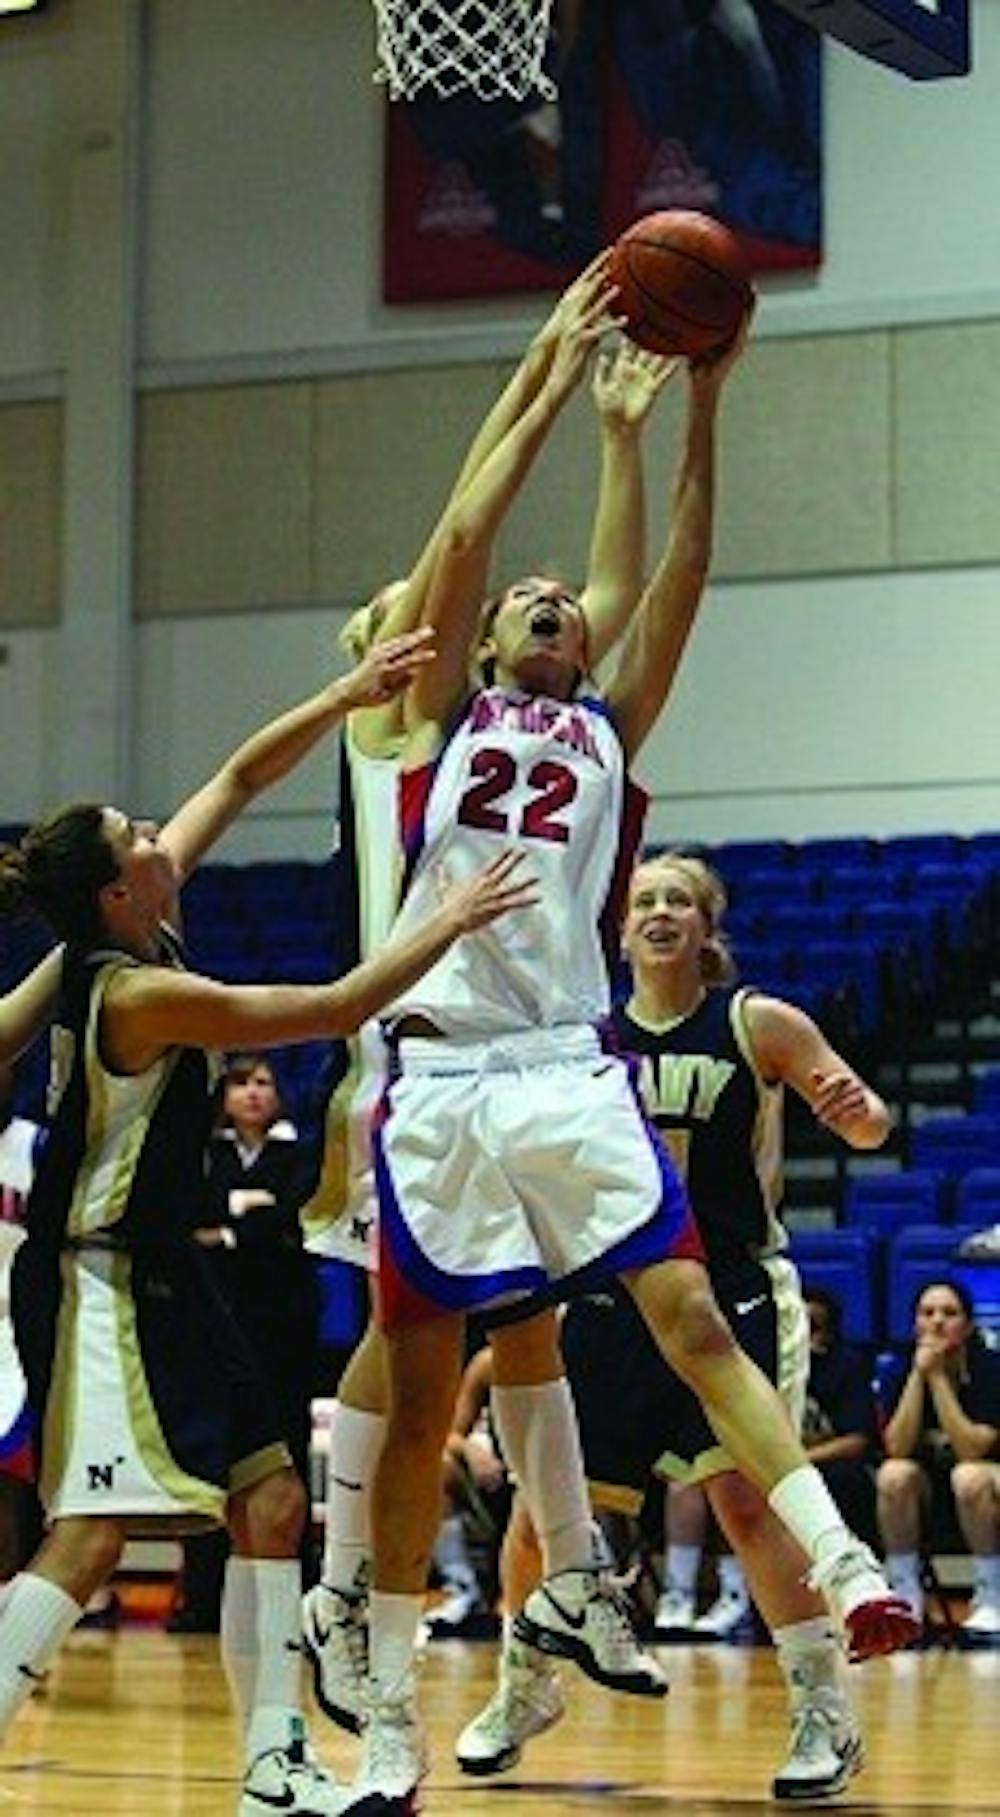 LAYING UP - Sophomore forward Liz Leer goes up for a layup in last night's game against Navy, scoring two of her 18 points of the night.  The effort was not enough to prevent a 68-61 loss for the Eagles. 